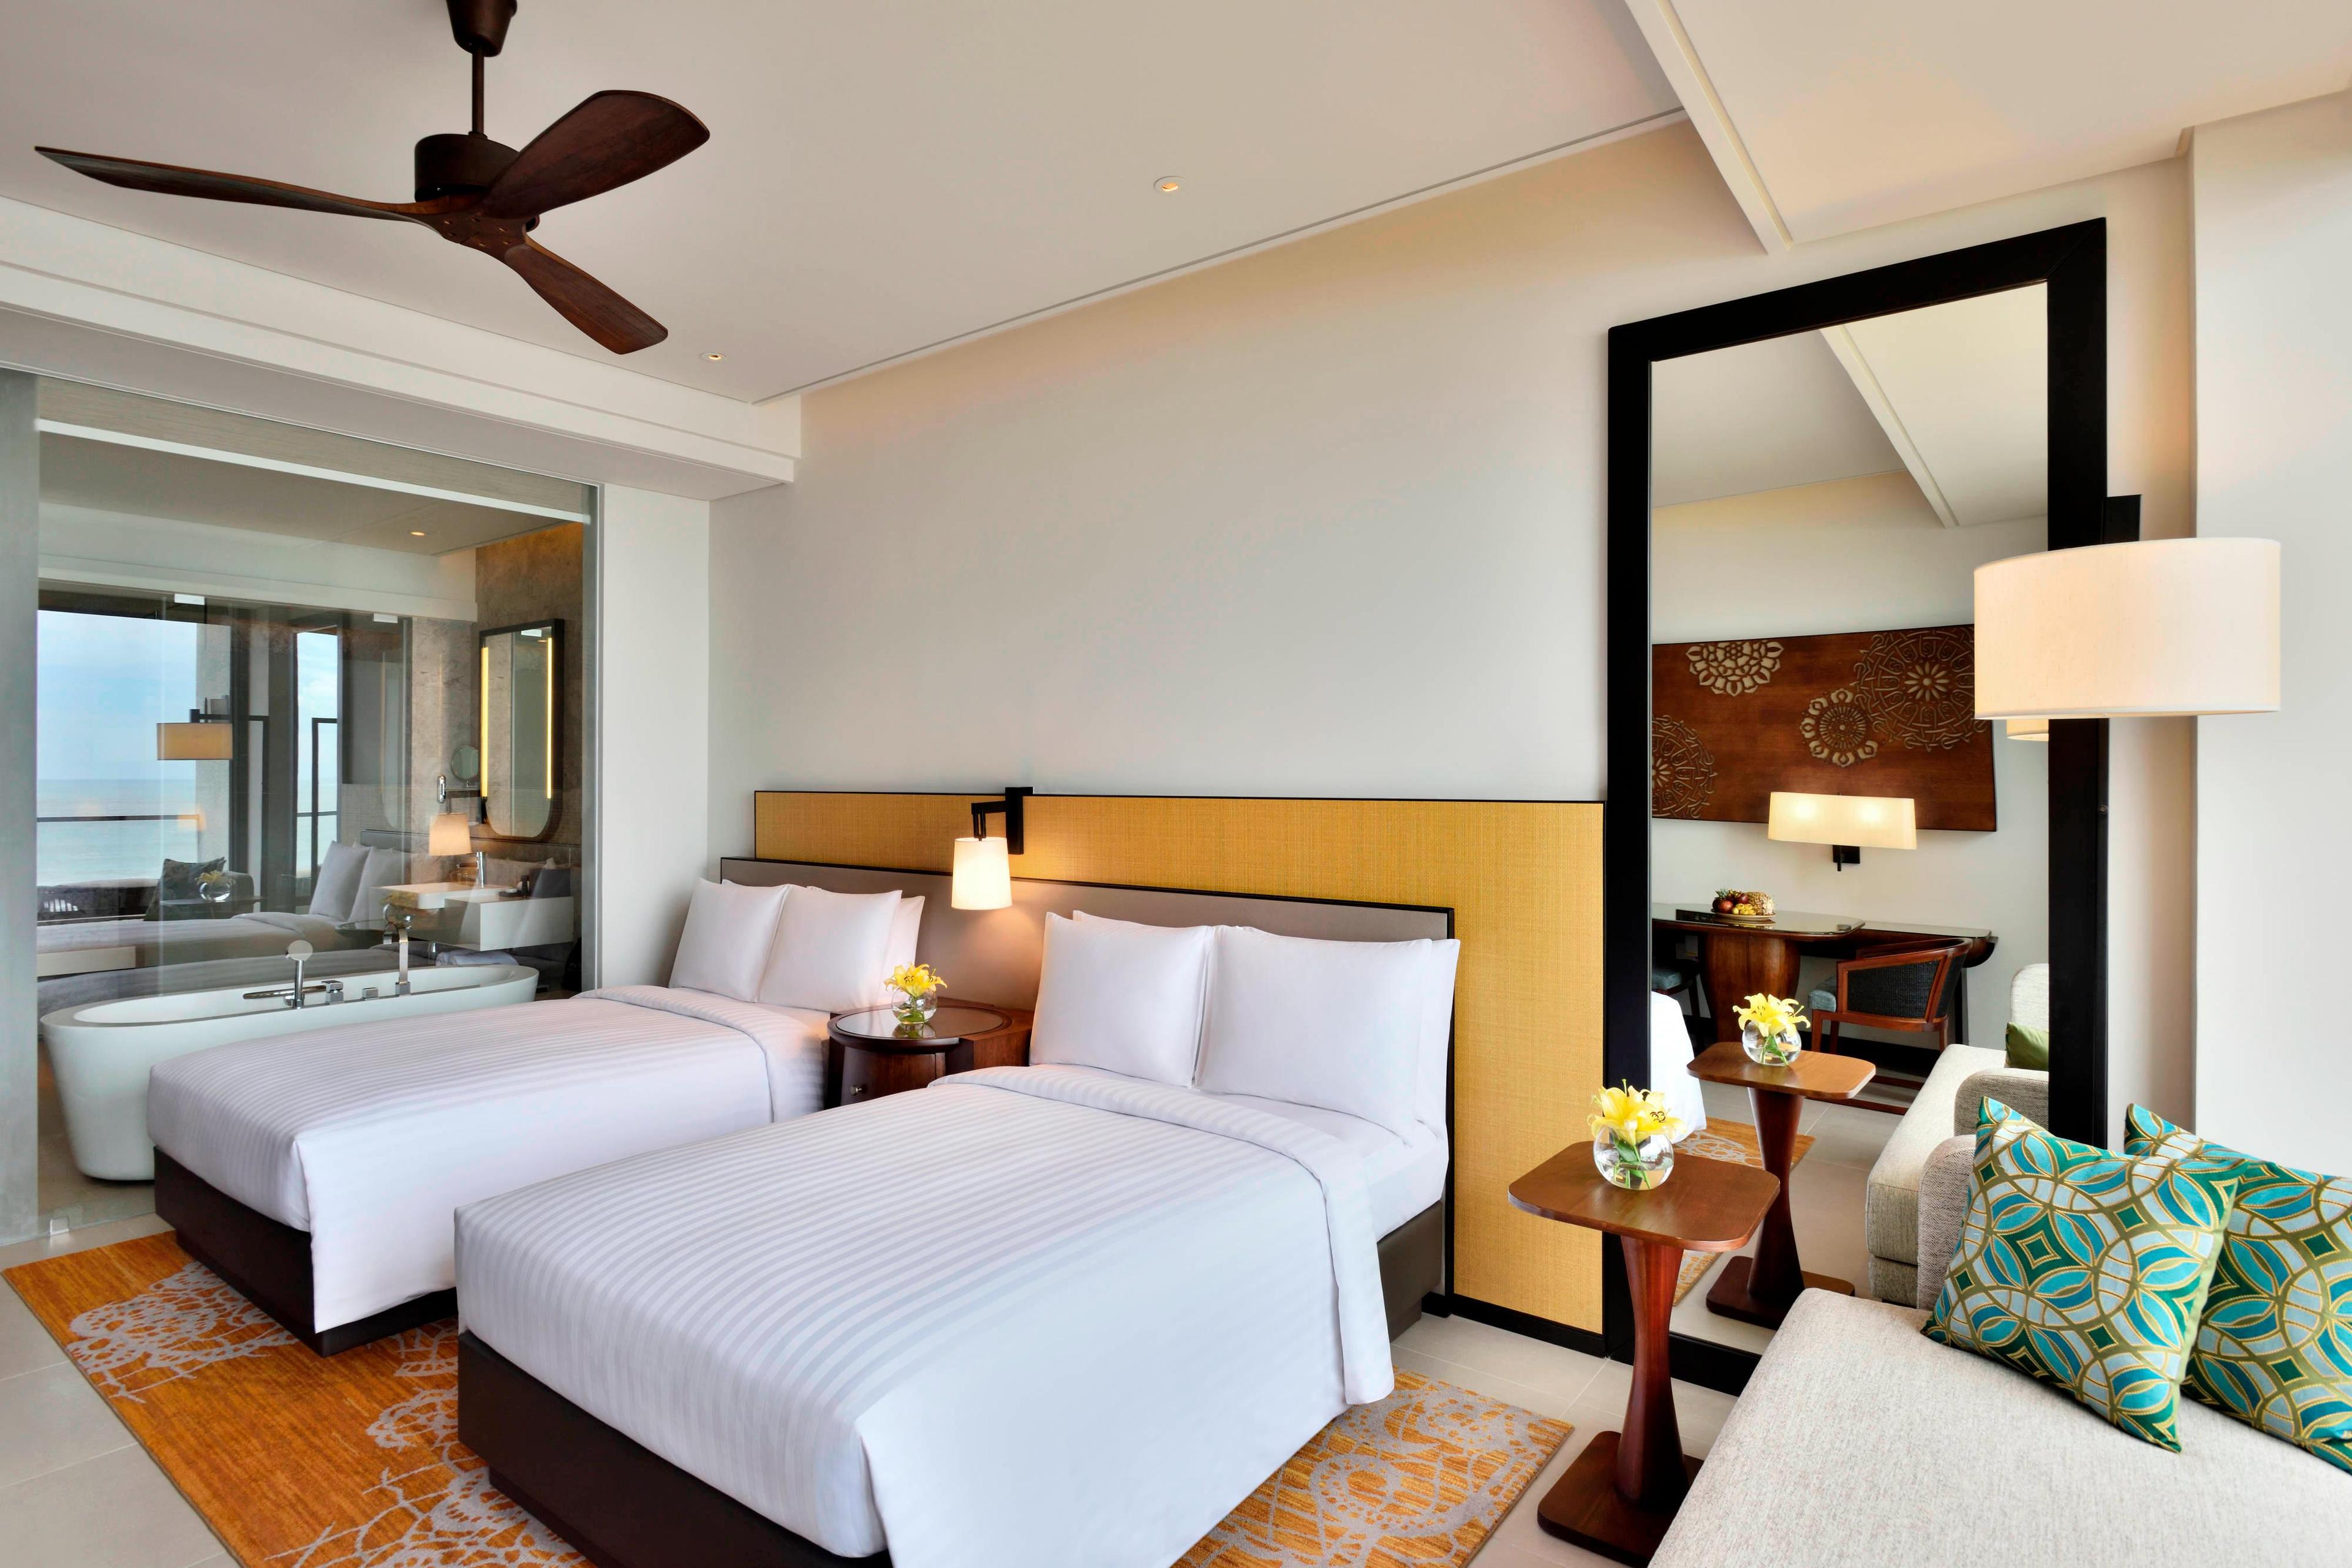 Showcasing two comfortable double beds, our guest room can fit up to four guests comfortably for a rejuvenating stay in Weligama Bay.